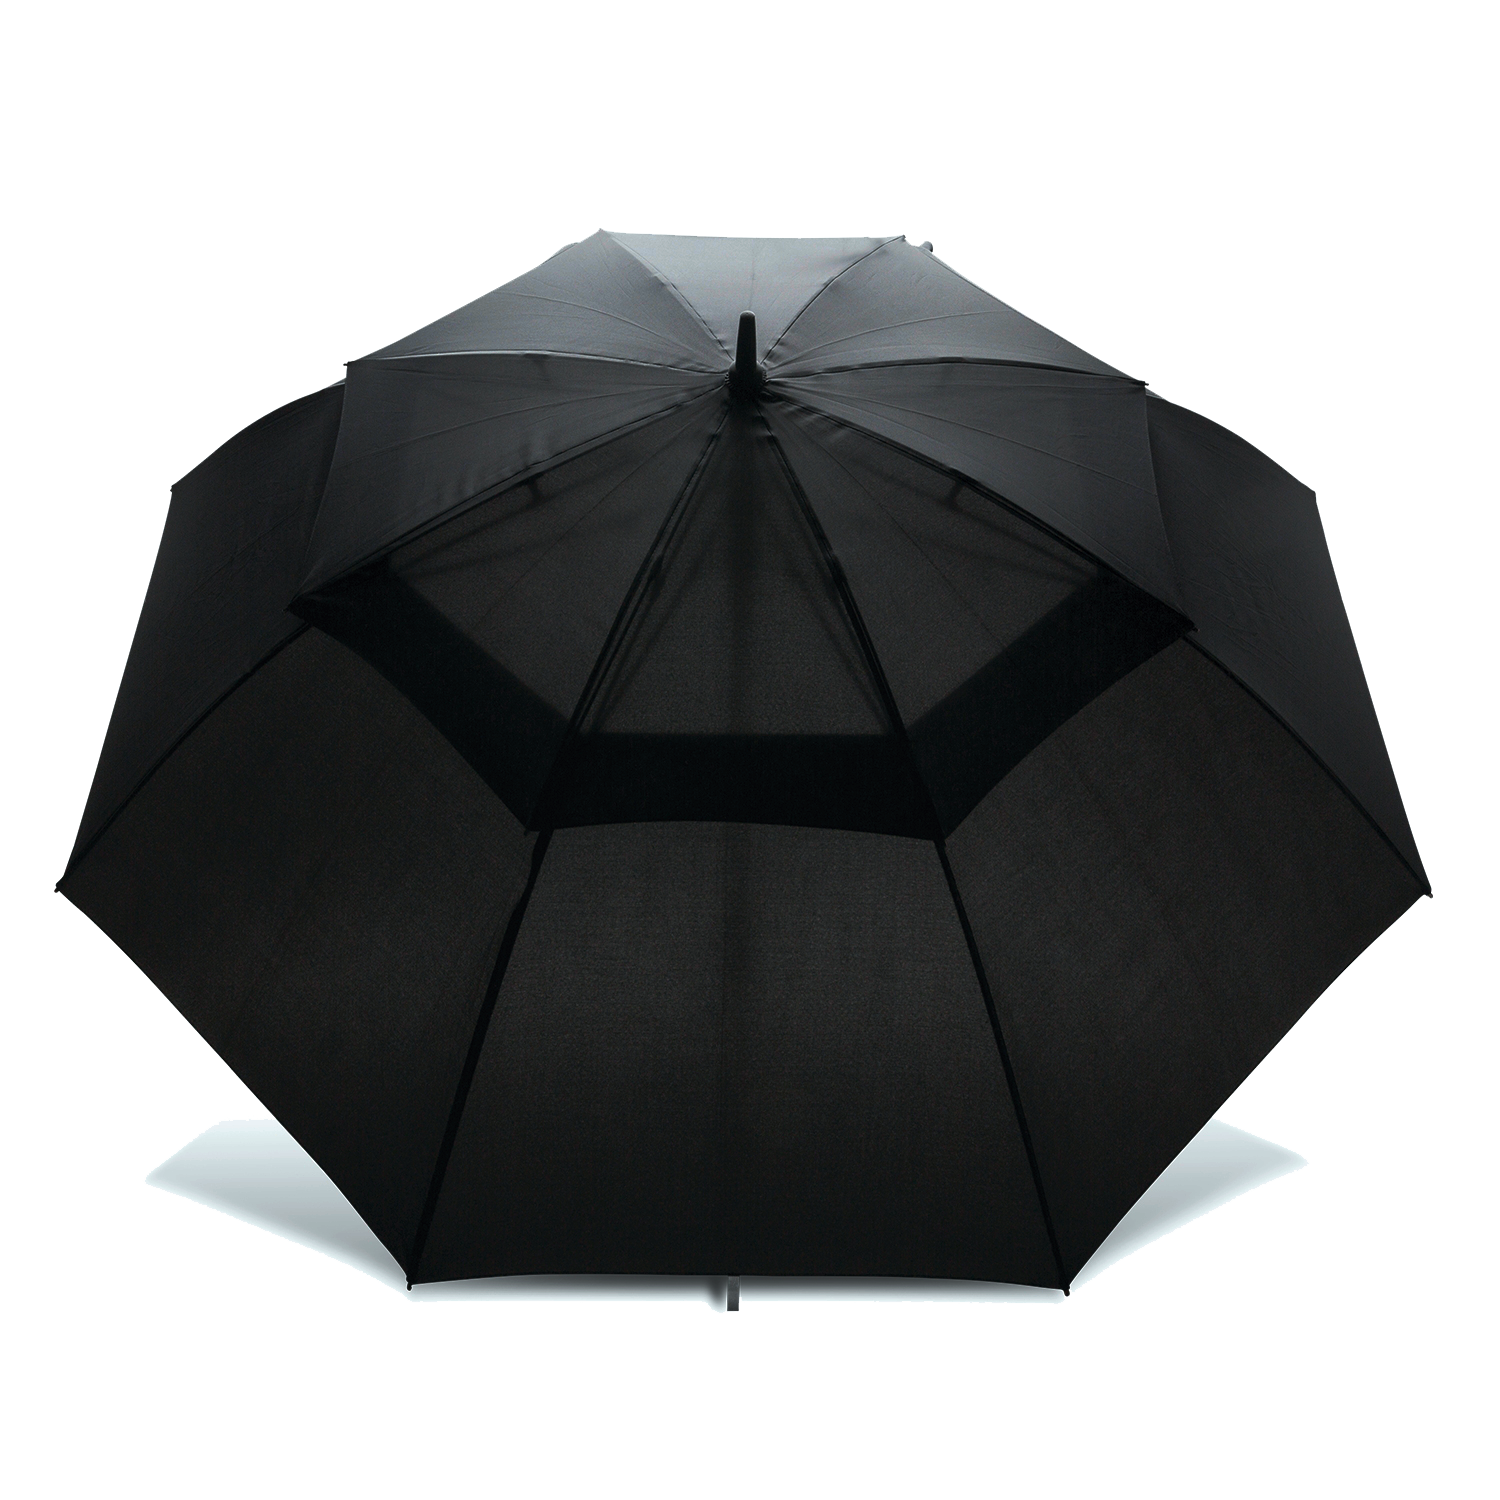 SWISS PEAK®️ TORNADO XL - Heavy Duty Storm Umbrella With Double Layer Wind Vent System, Wind Proof Fibreglass Frame - Auto-Open Push Button Feature